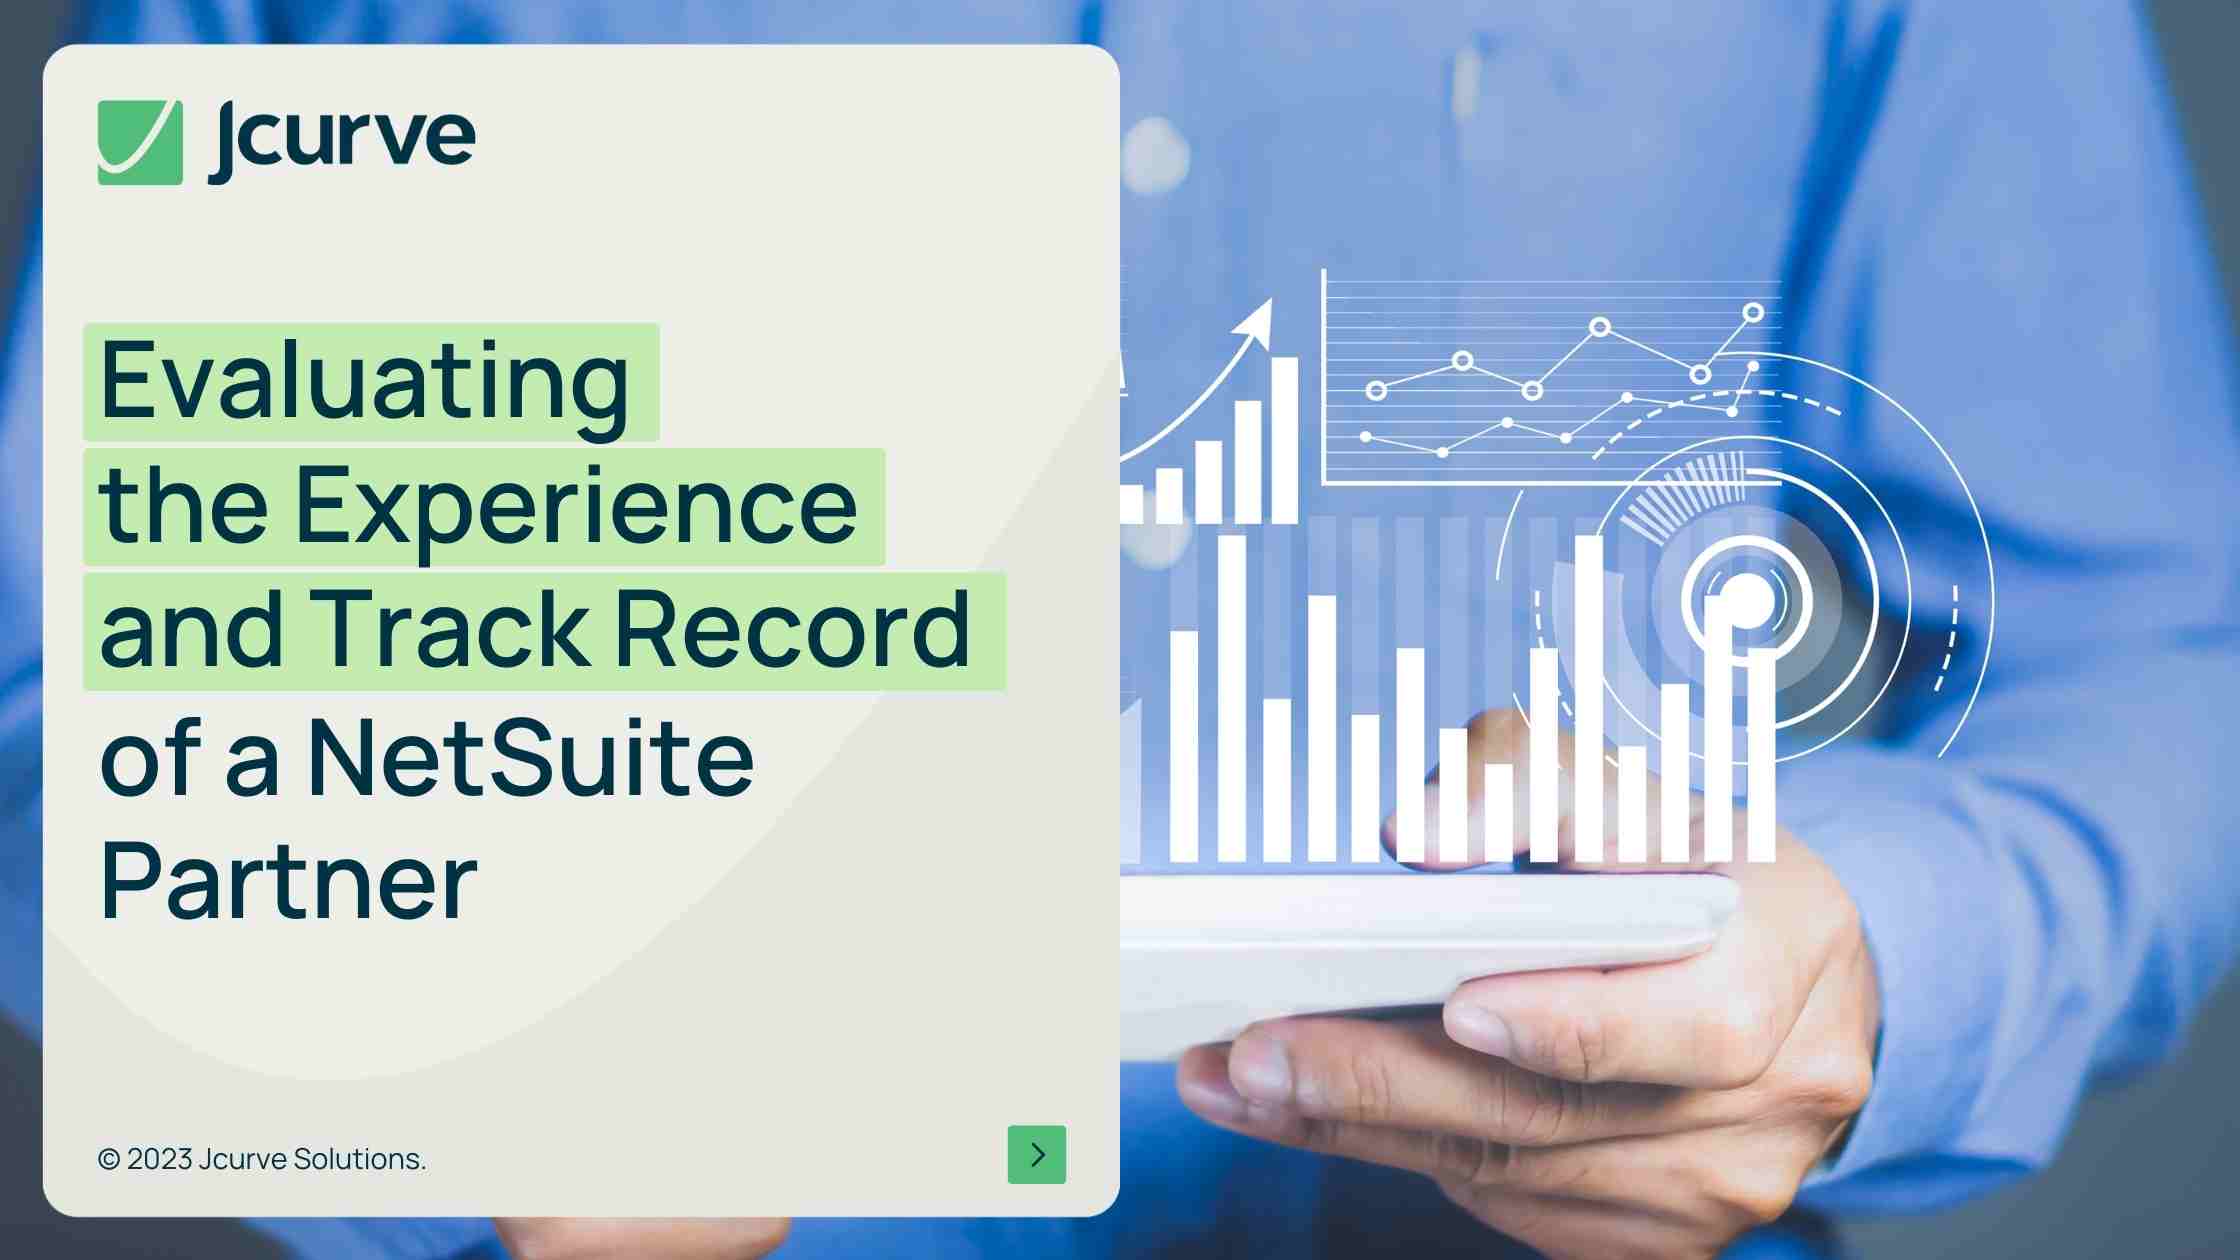 NZ Evaluating the Experience and Track Record of a NetSuite Partner